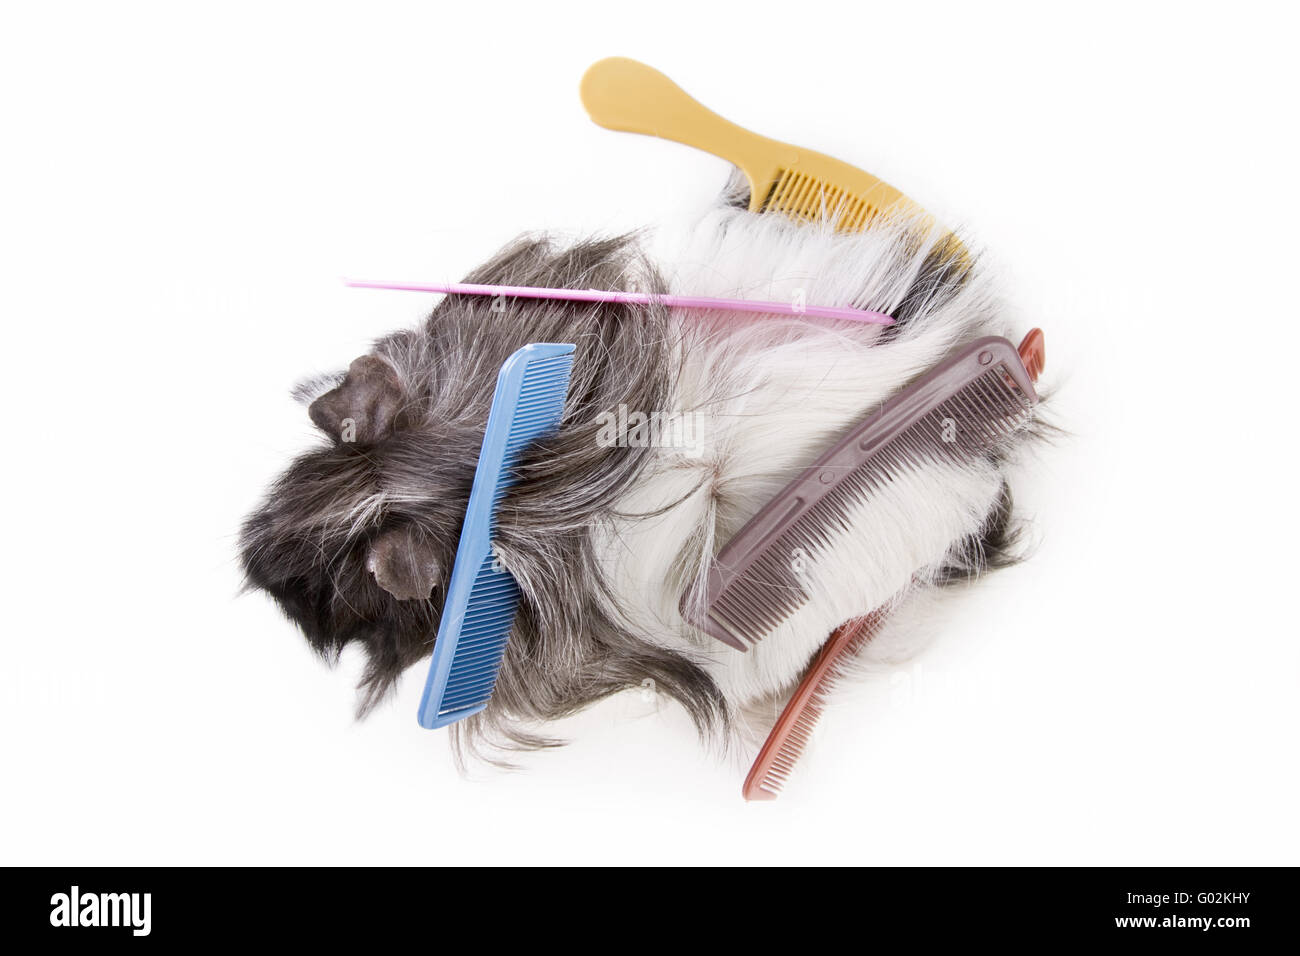 guinea pig with  combs Stock Photo